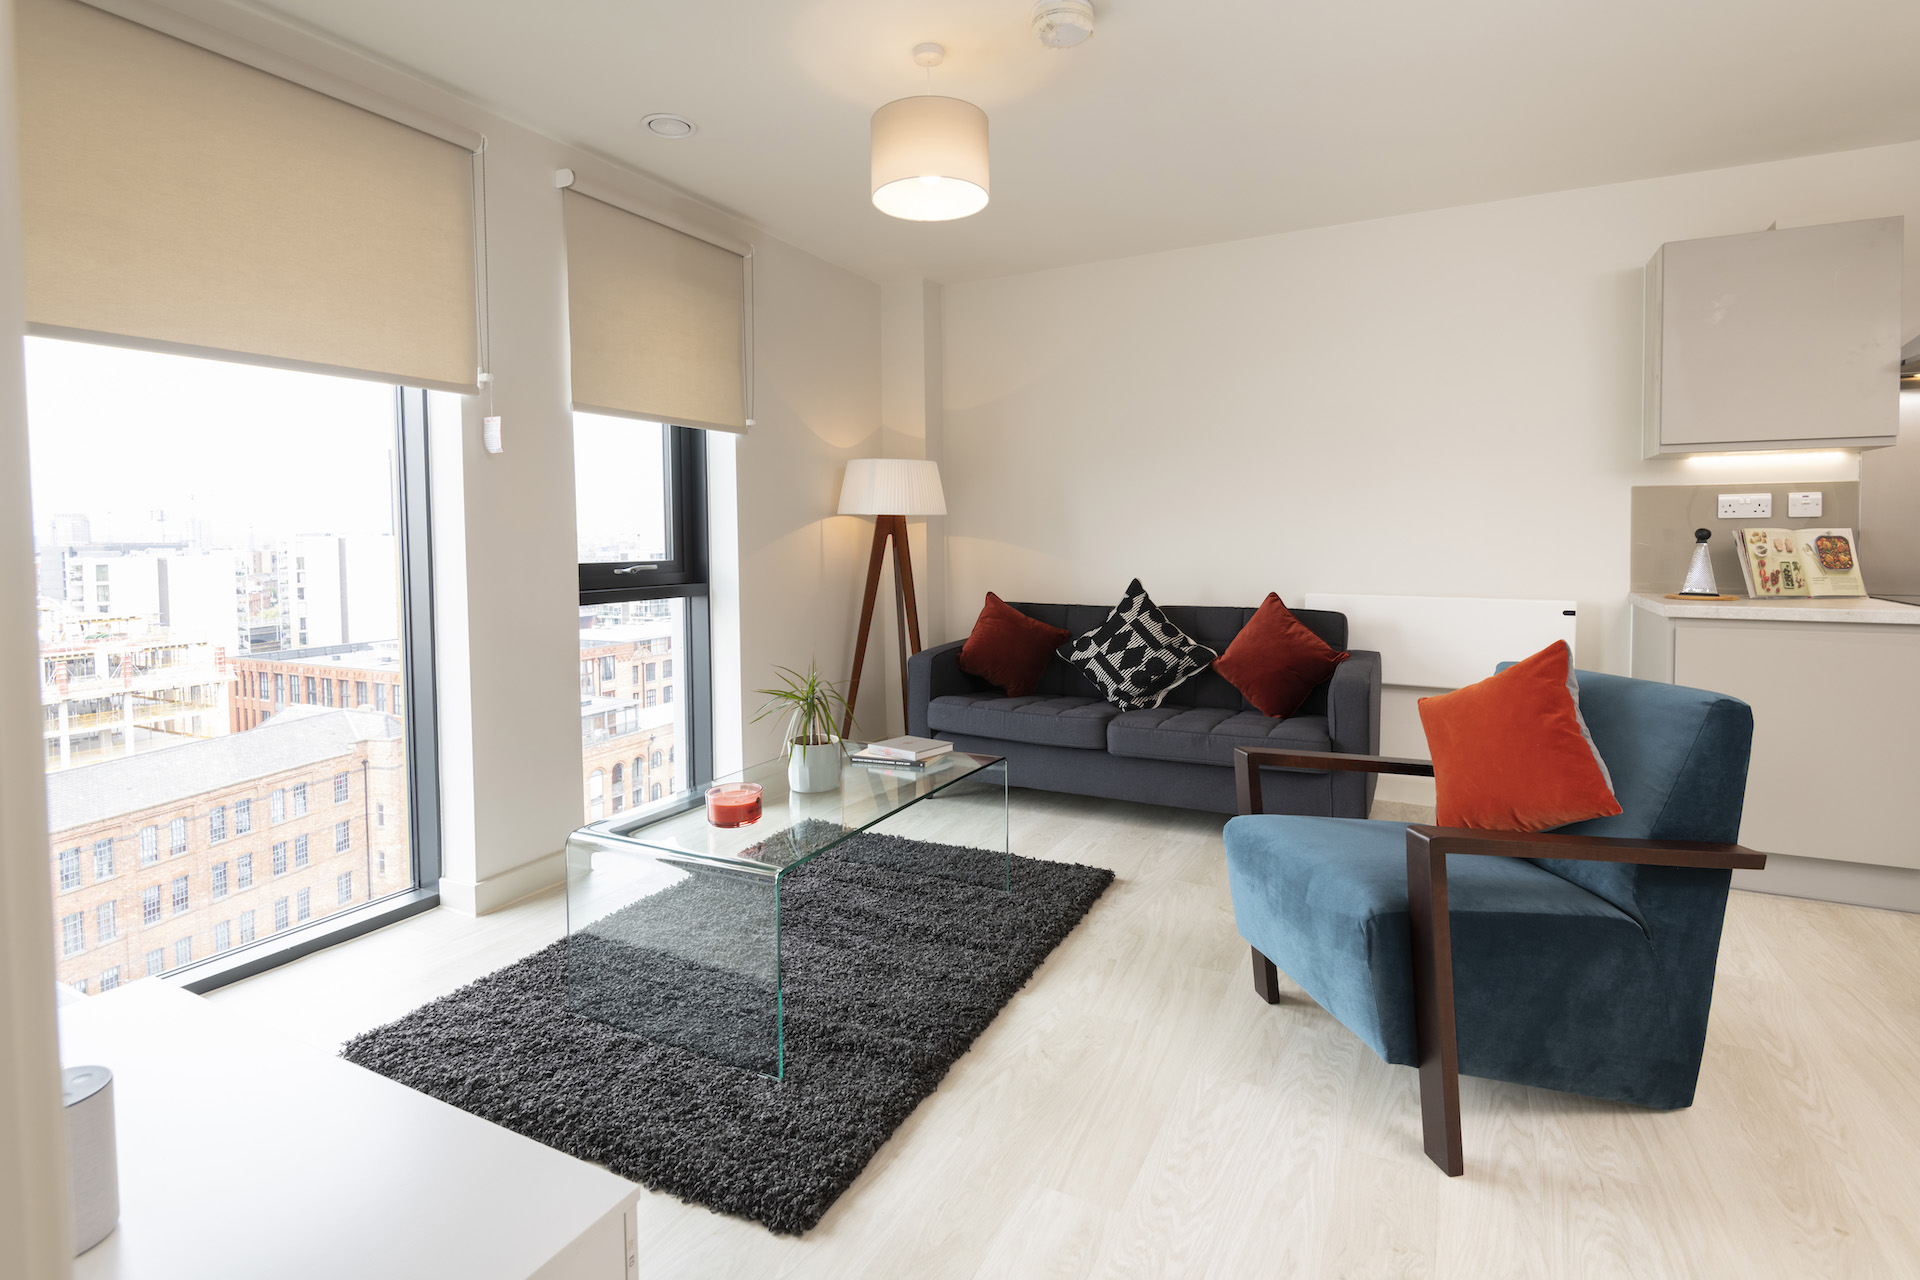 Apartments to Rent by Allsop at The Trilogy, Manchester, M15, living area